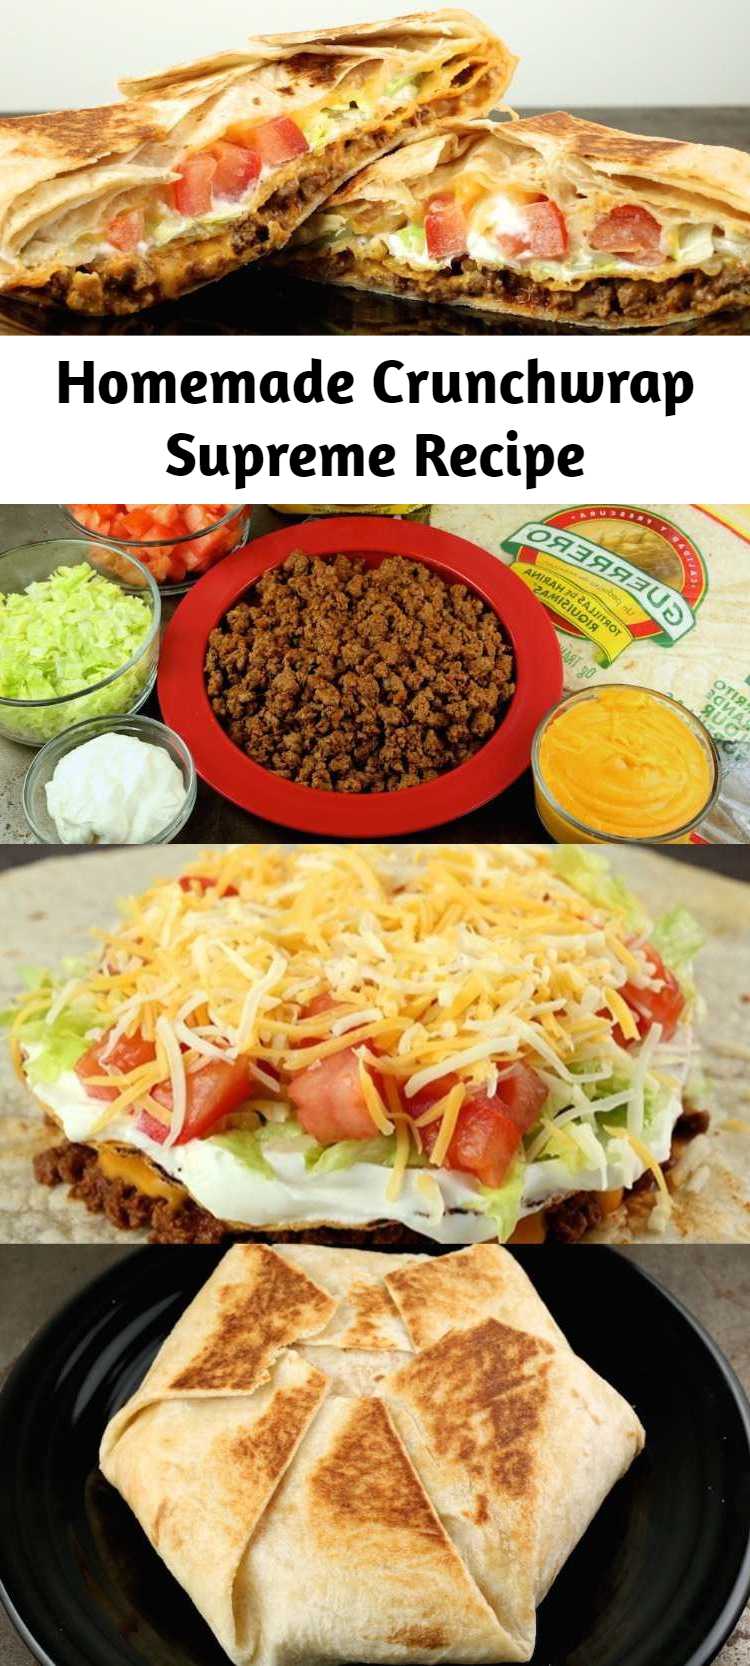 Homemade Crunchwrap Supreme Recipe - You can now make everyone’s favorite Taco Bell item, the Crunchwrap Supreme, at home with this easy to follow recipe. Just like the fast-food version, this homemade Crunchwrap Supreme is packed with all the toppings!